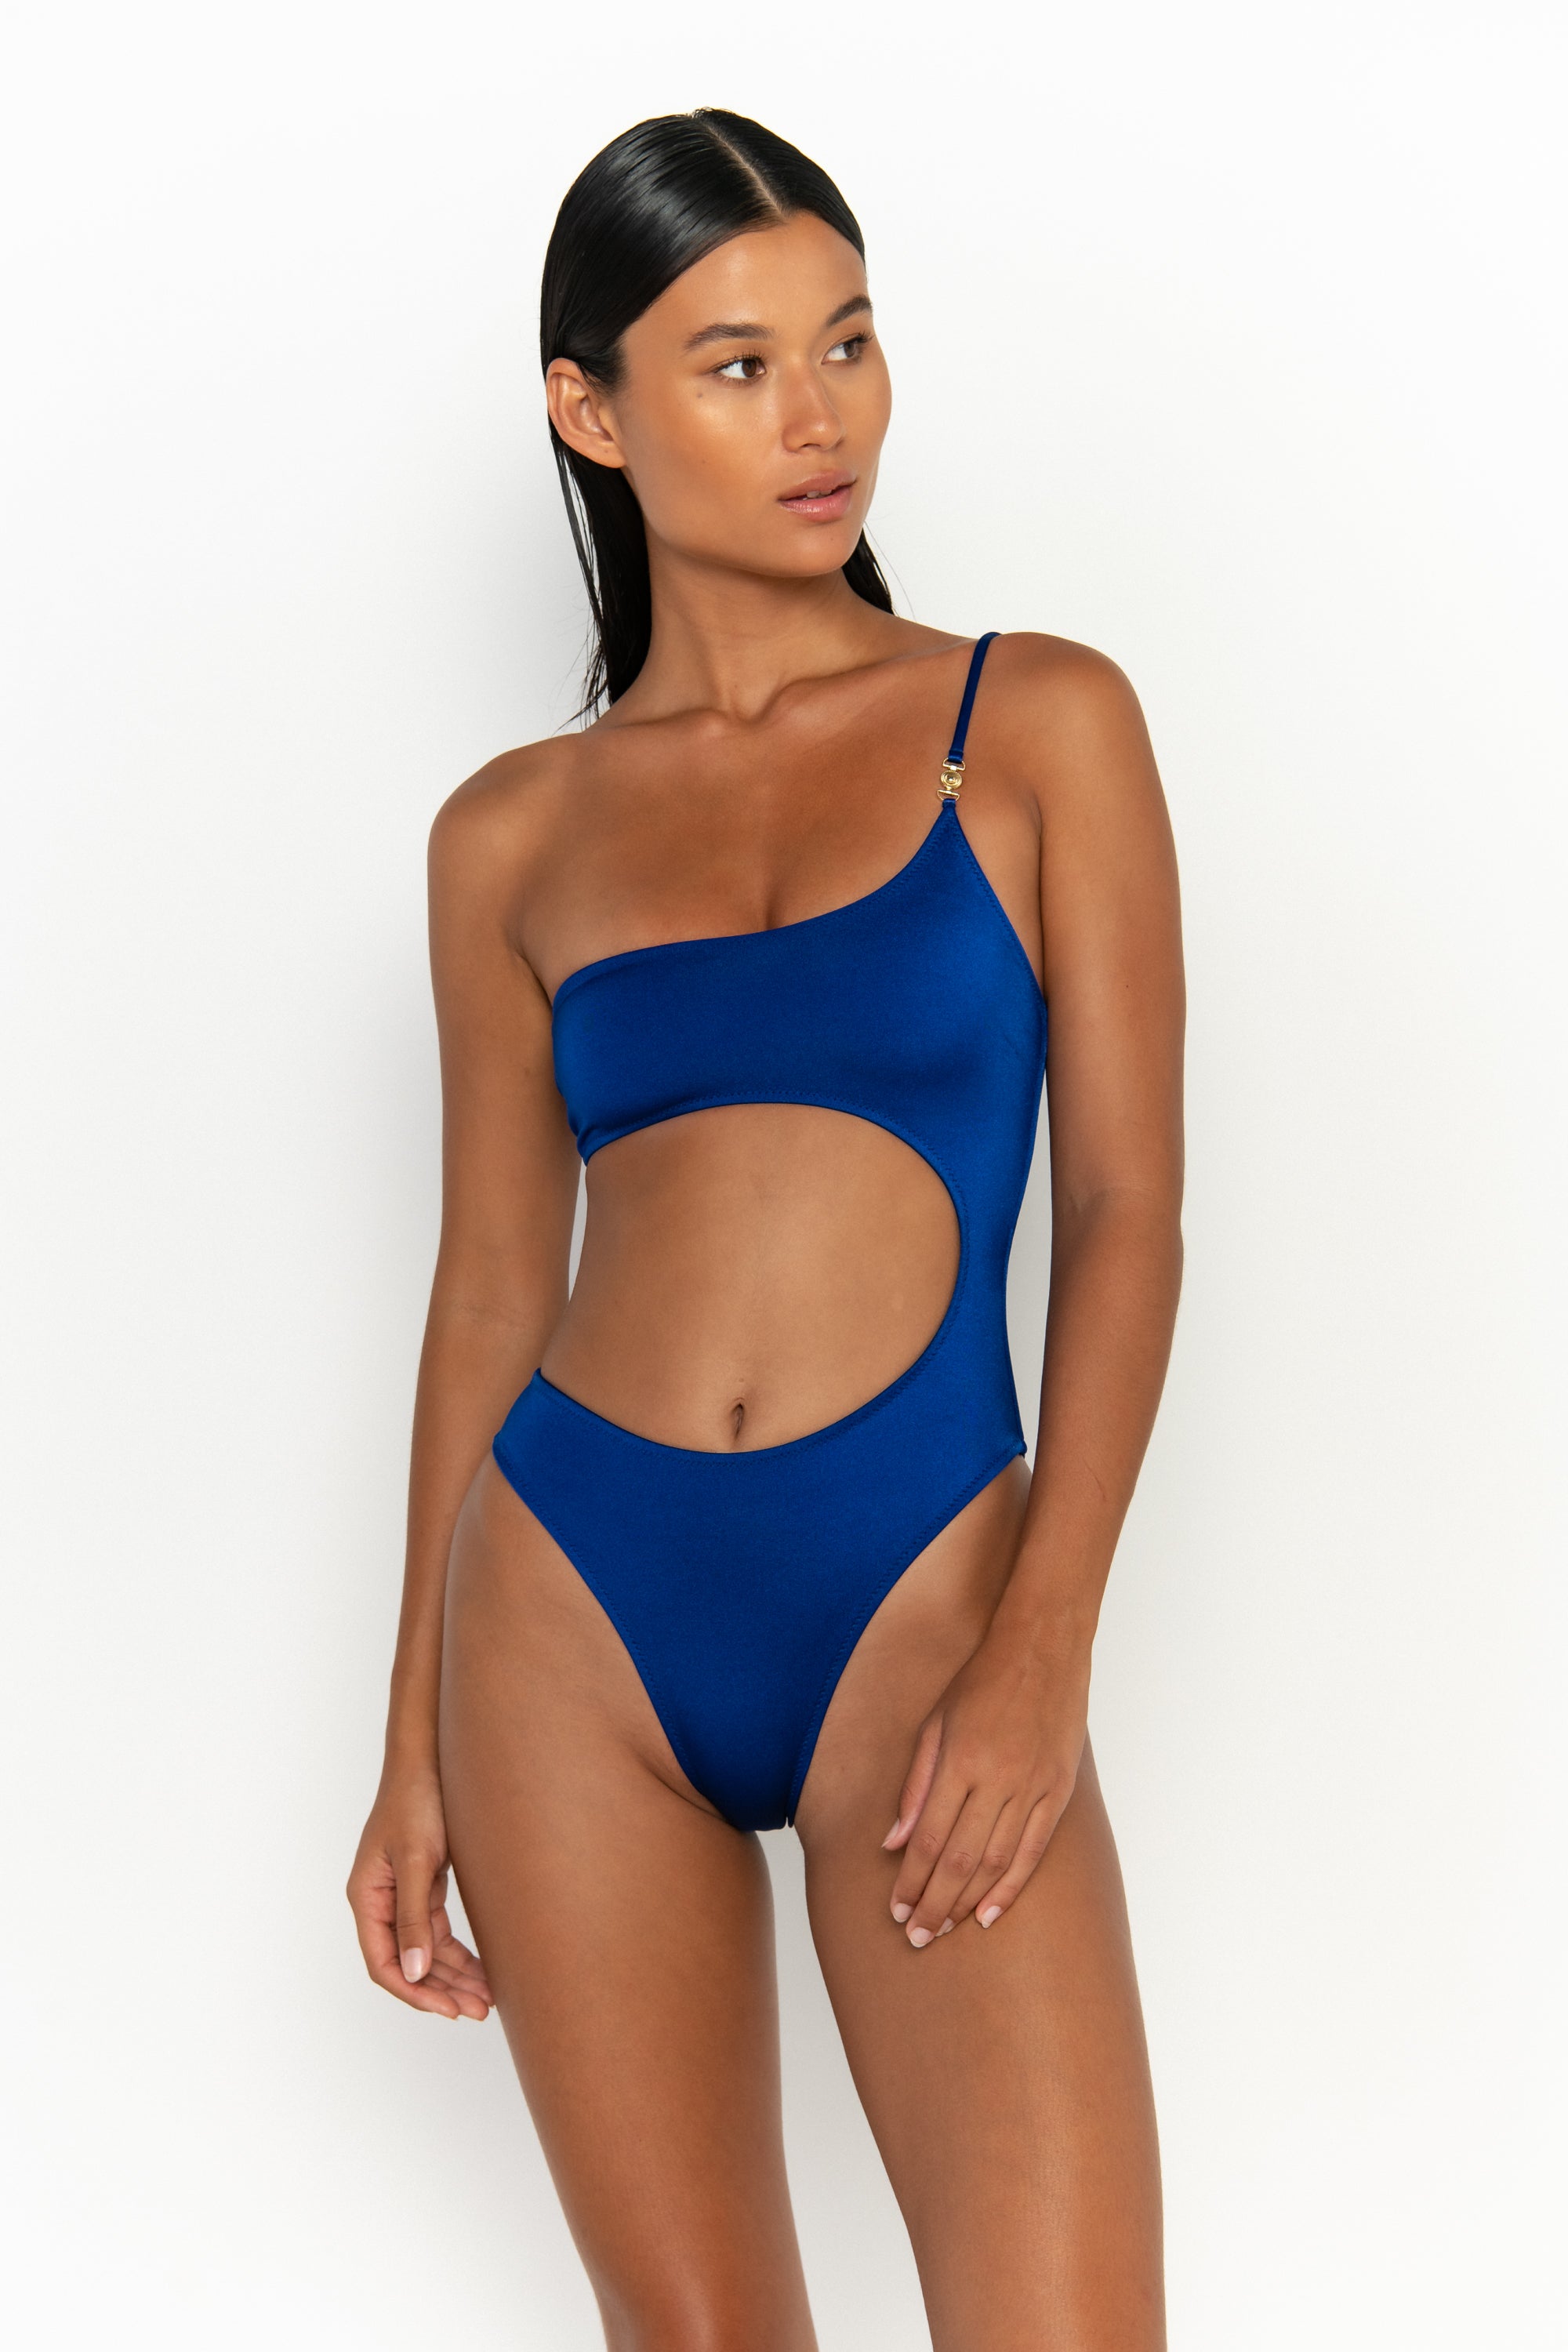 front view elegant woman wearing luxury swimsuit from sommer swim - bonita olympus is an royal blue one piece one shoulder swimsuit